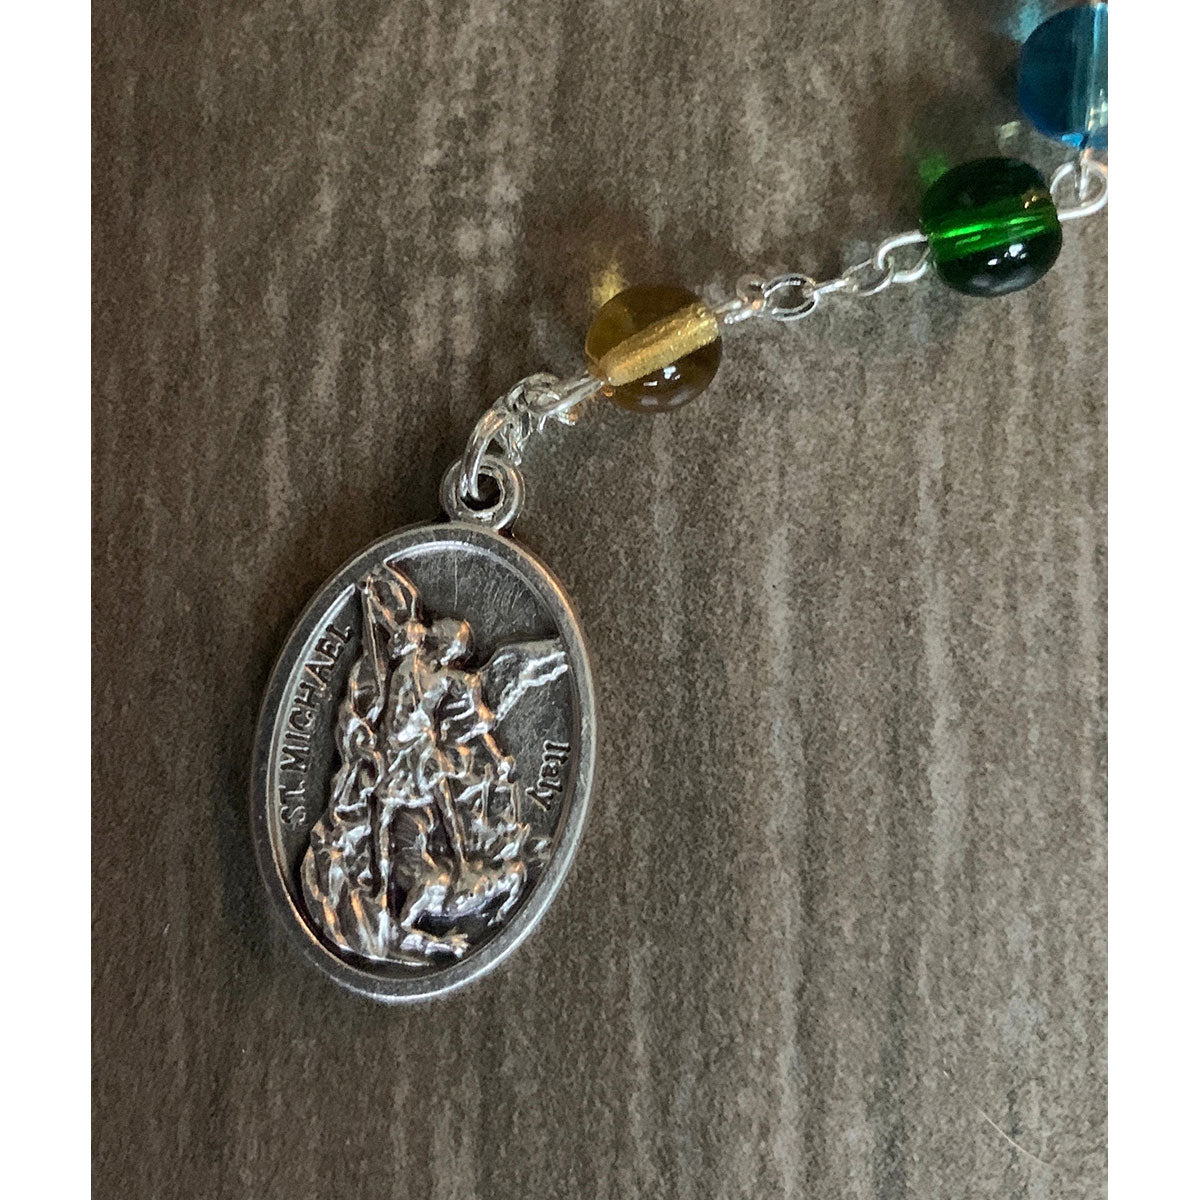 St. Michael Chaplet with Prayer Card